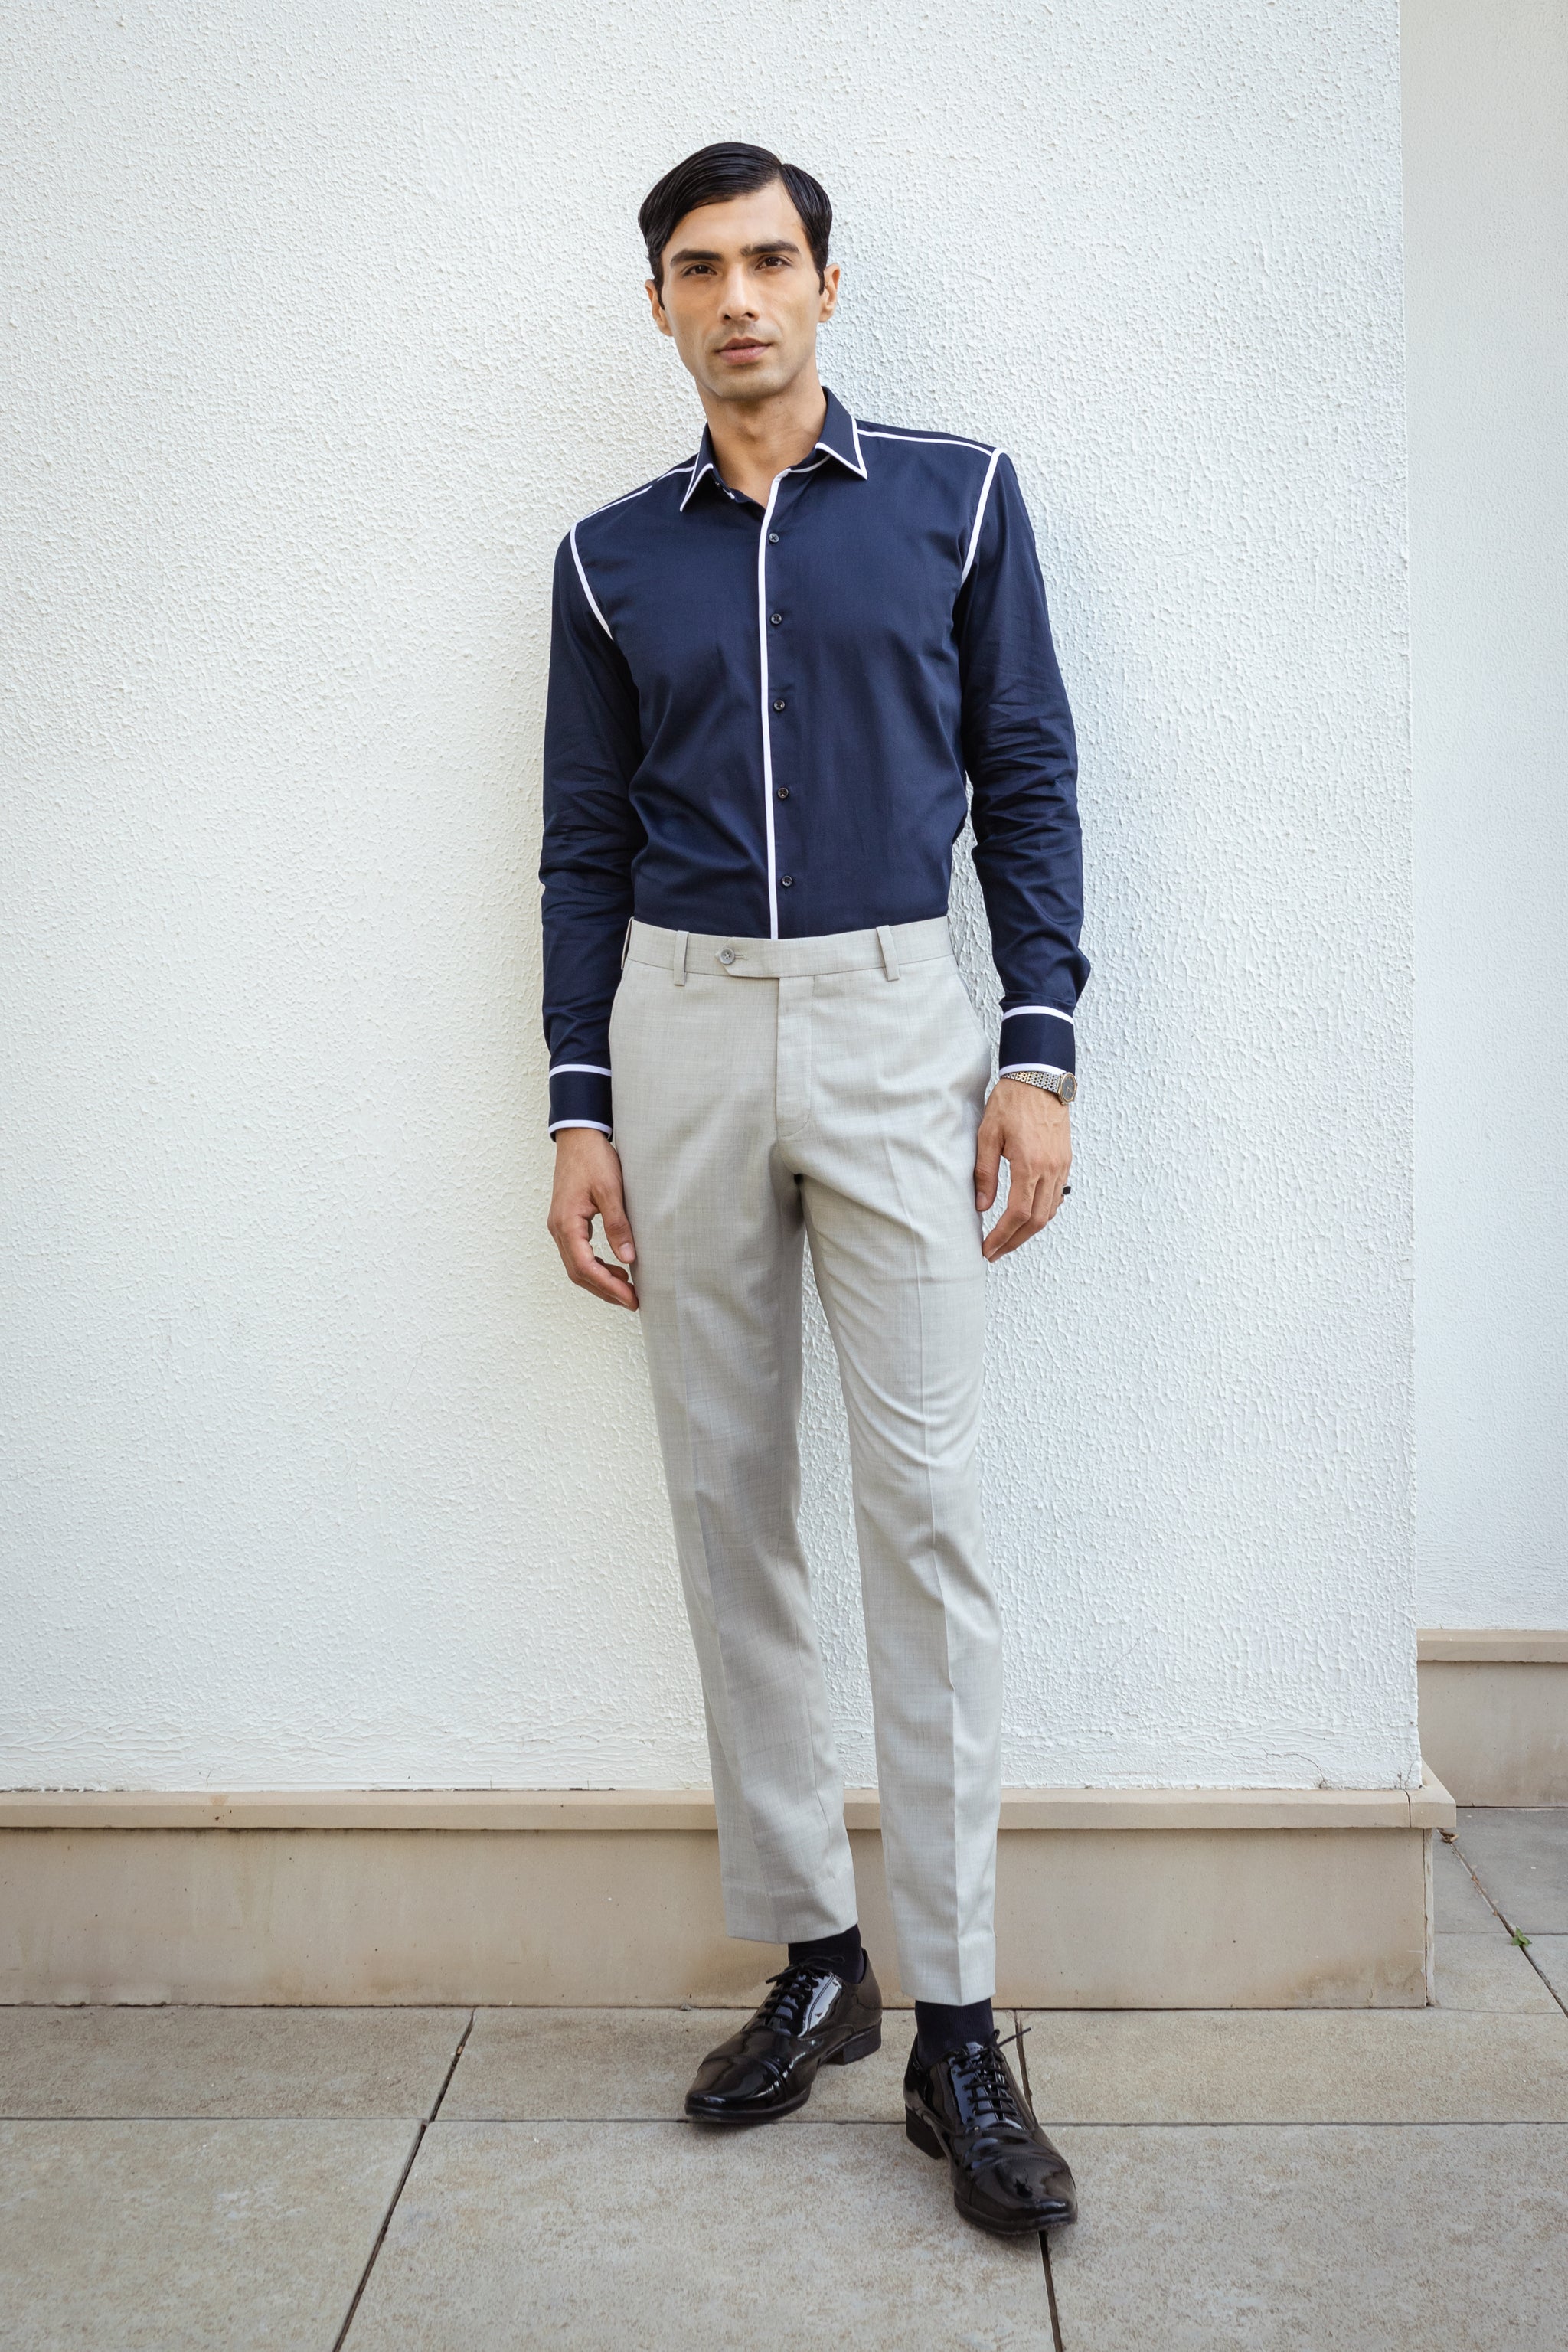 Navy Blue Shirt With White Line Detailing.